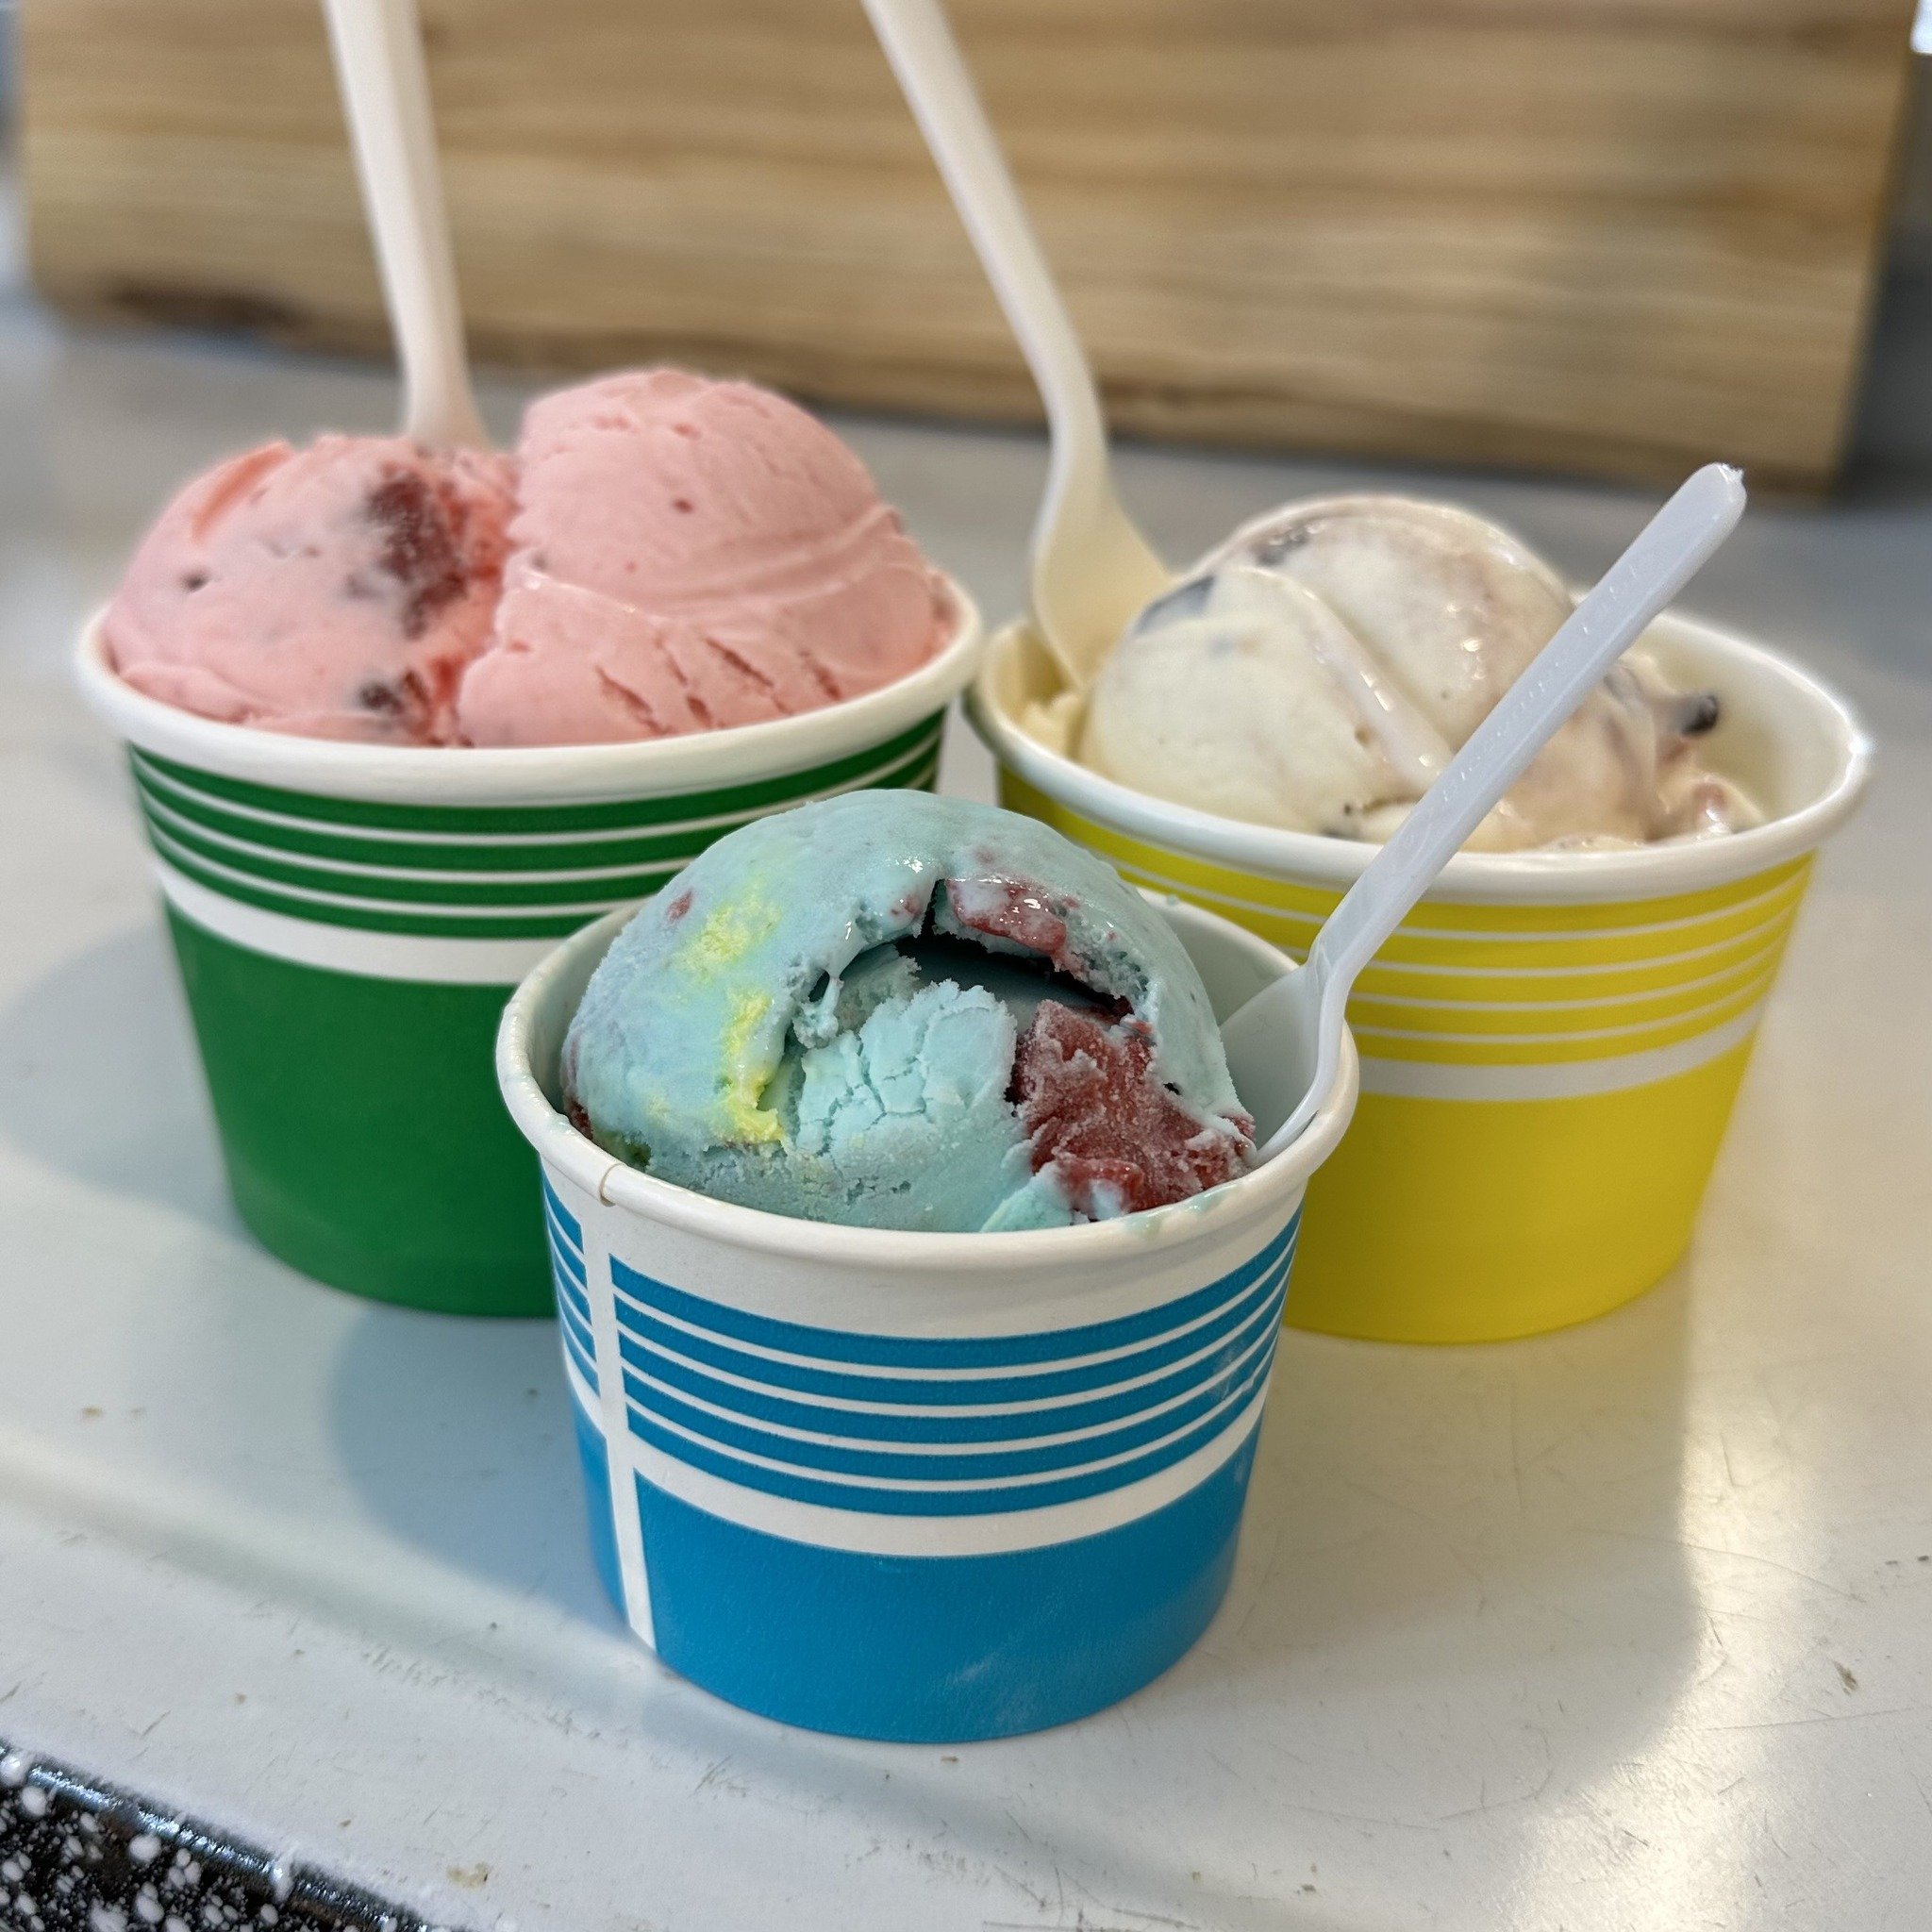 Celebrating the warmer temps with a great Saturday night ice cream special - 1/2 off ice cream from 4-8pm, today only! We proudly serve Guernsey - a locally owned and operated dairy company.  For our dairy sensitive friends, we carry their Vegan Blac